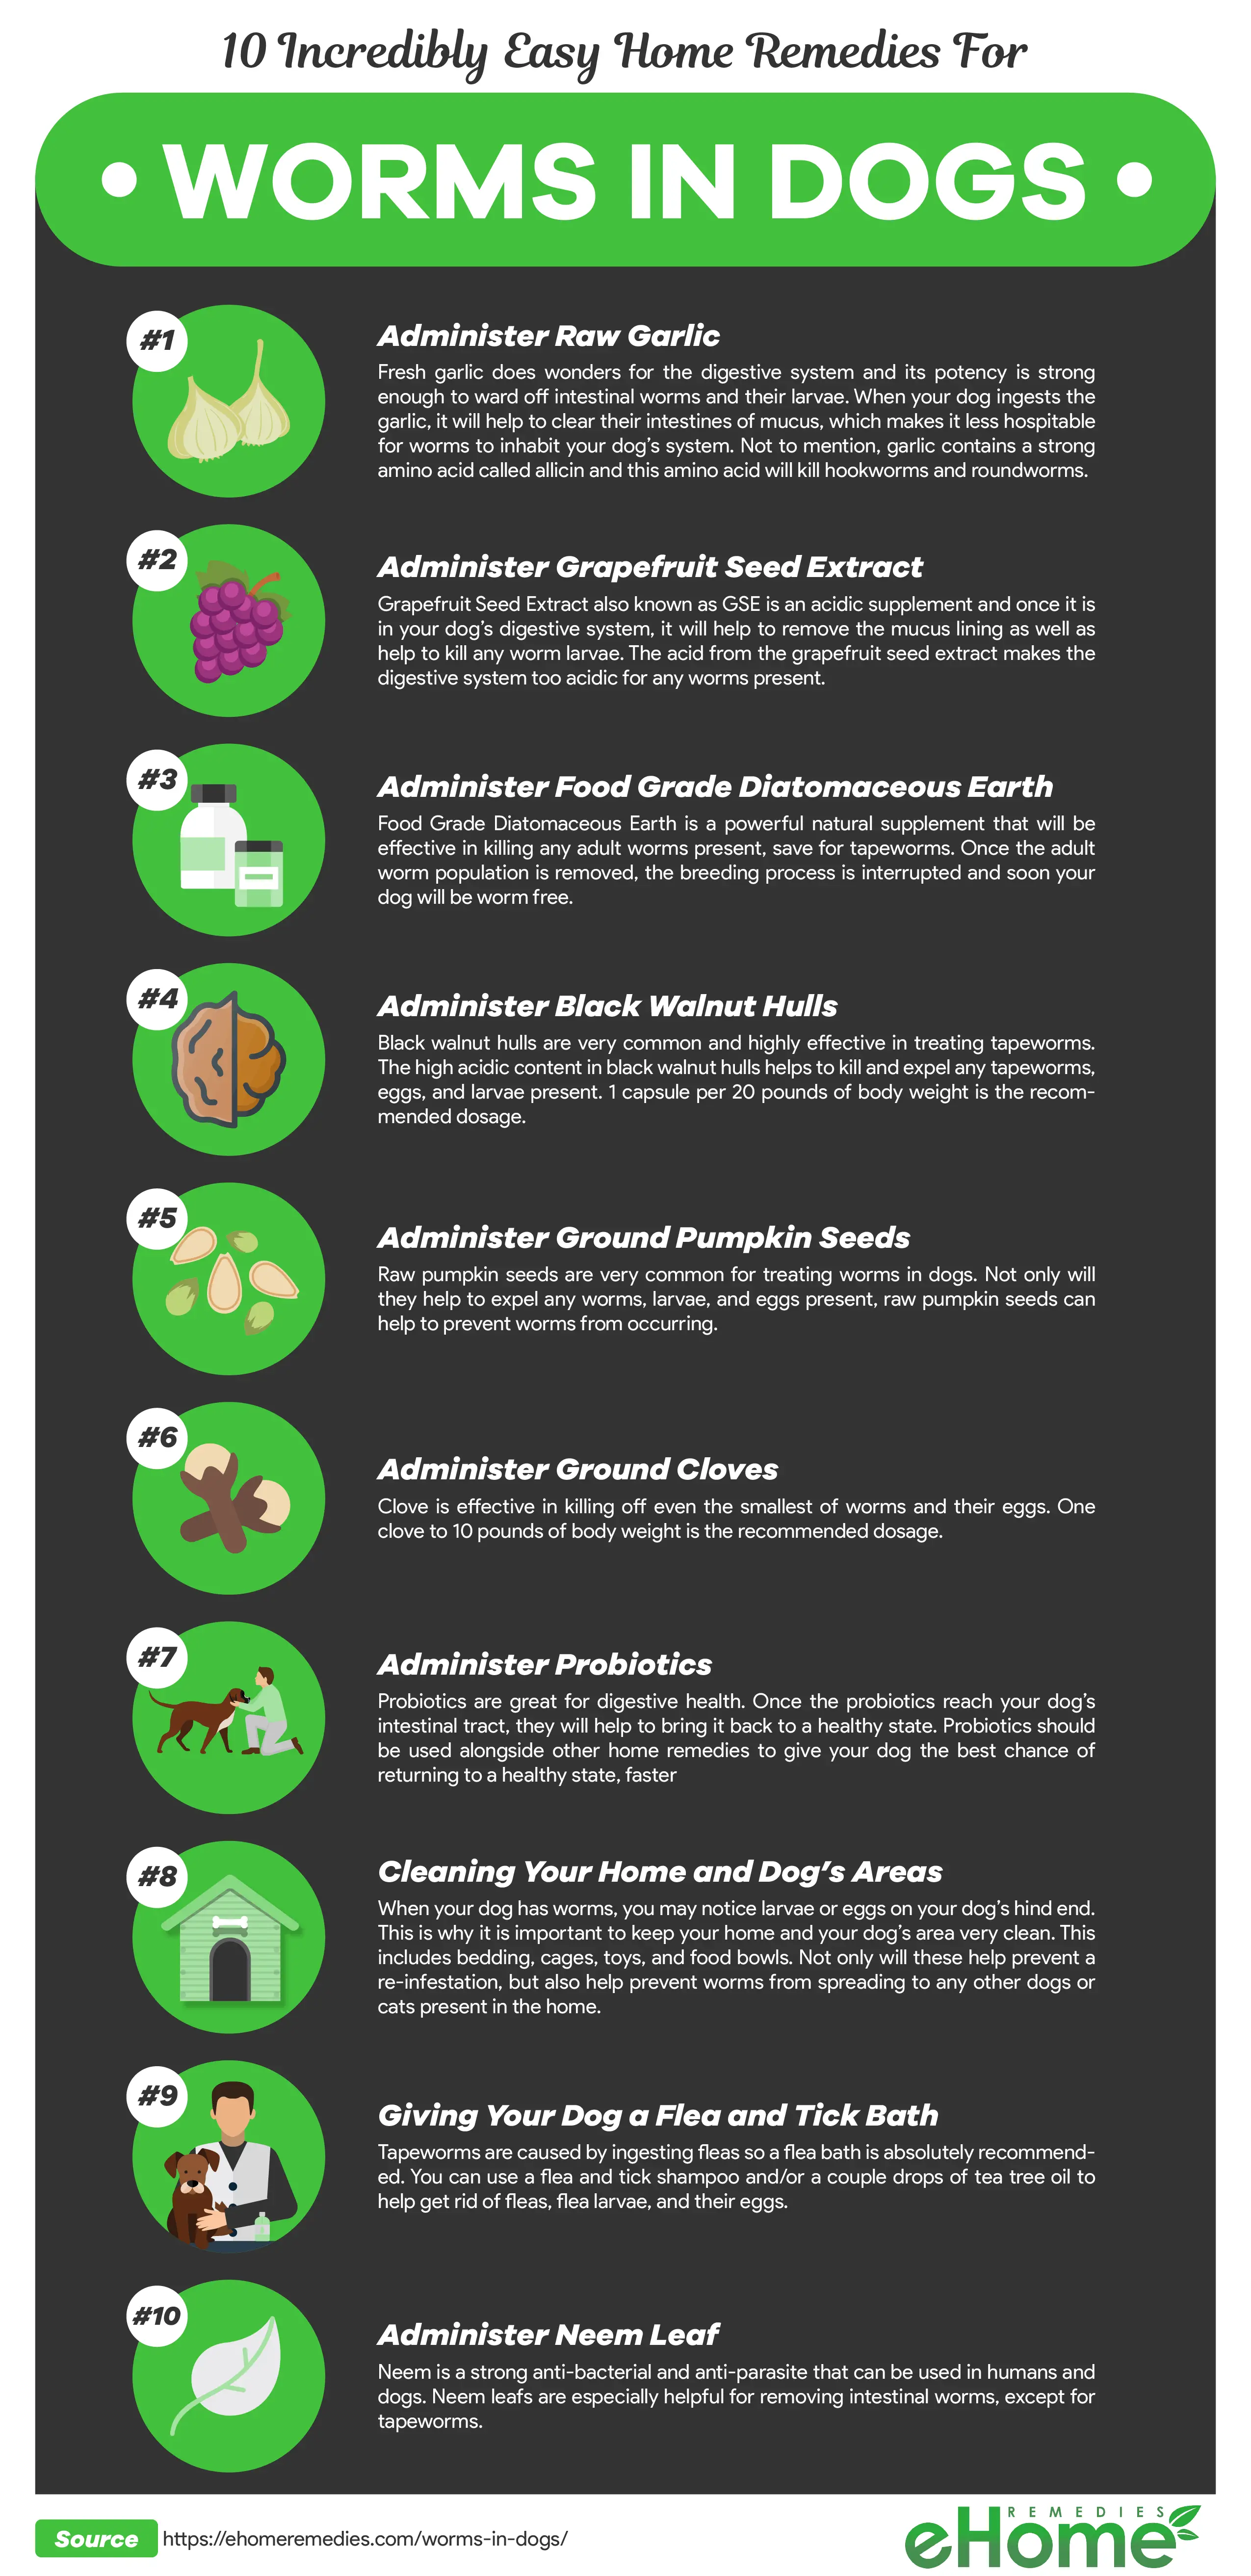 Home Remdies for Worms in Dogs Infographic